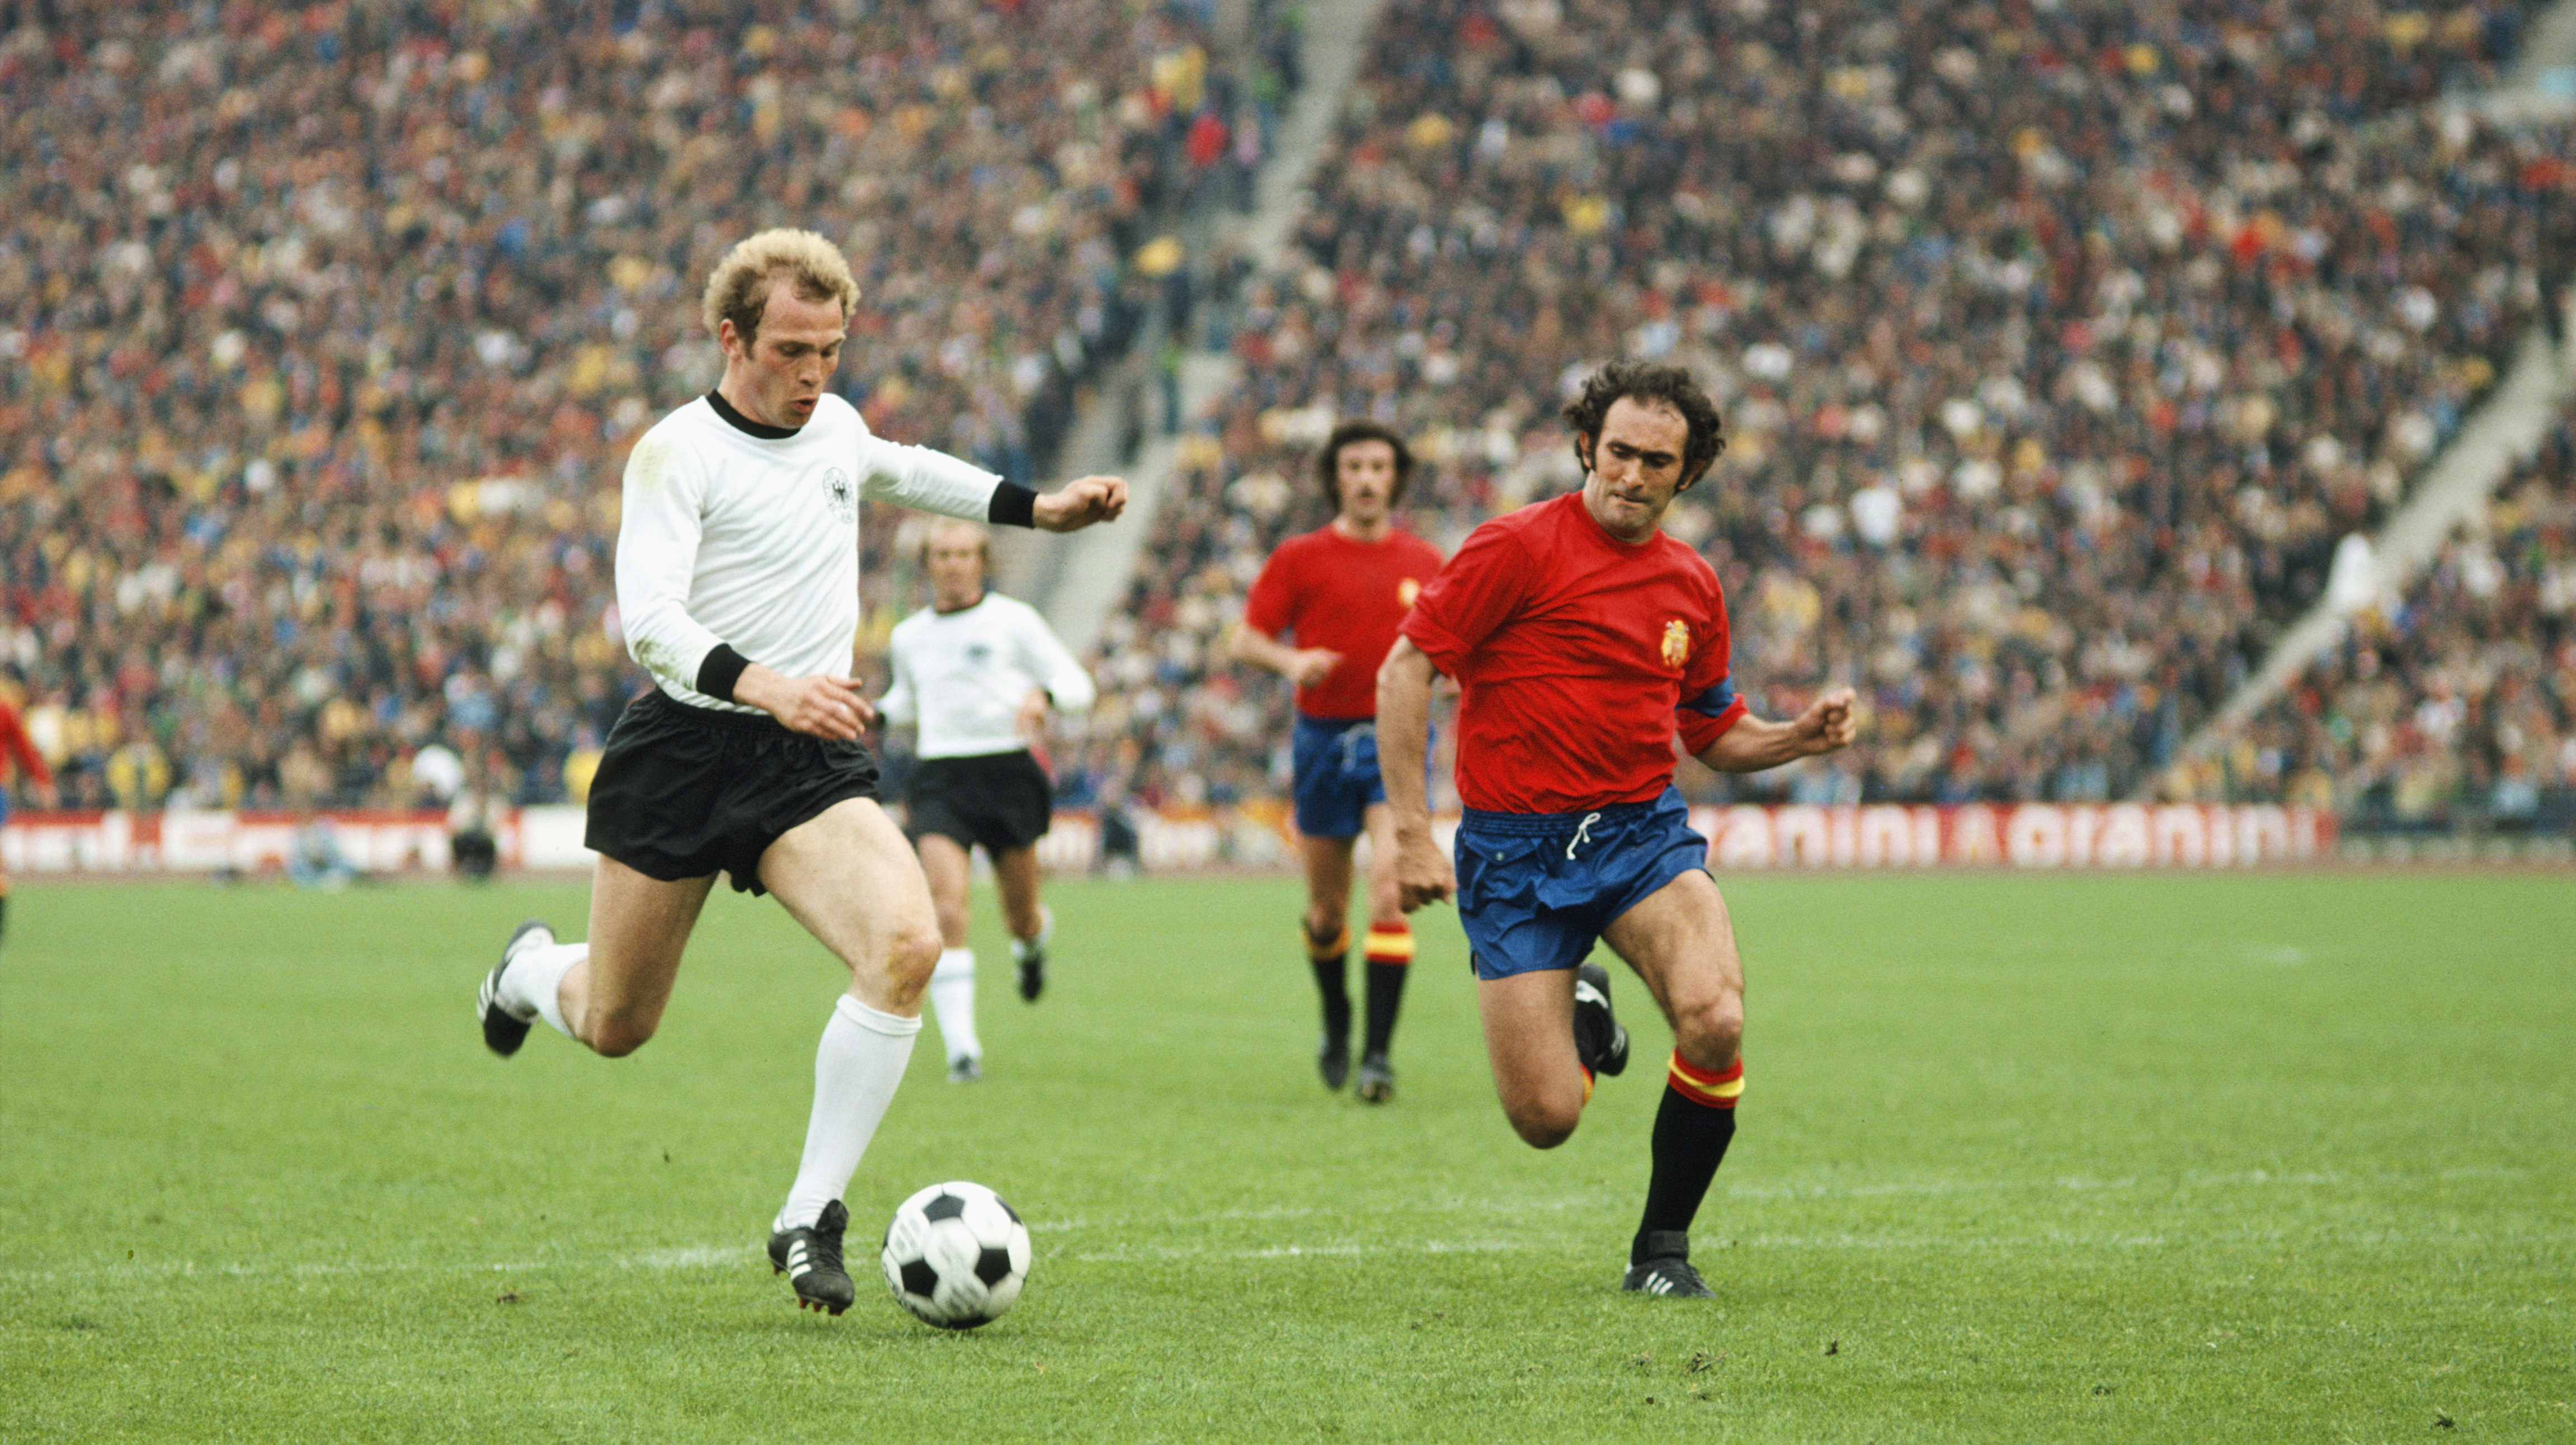 West Germany's Uli Hoeness and Spain's Pirri compete for the ball in 1976.